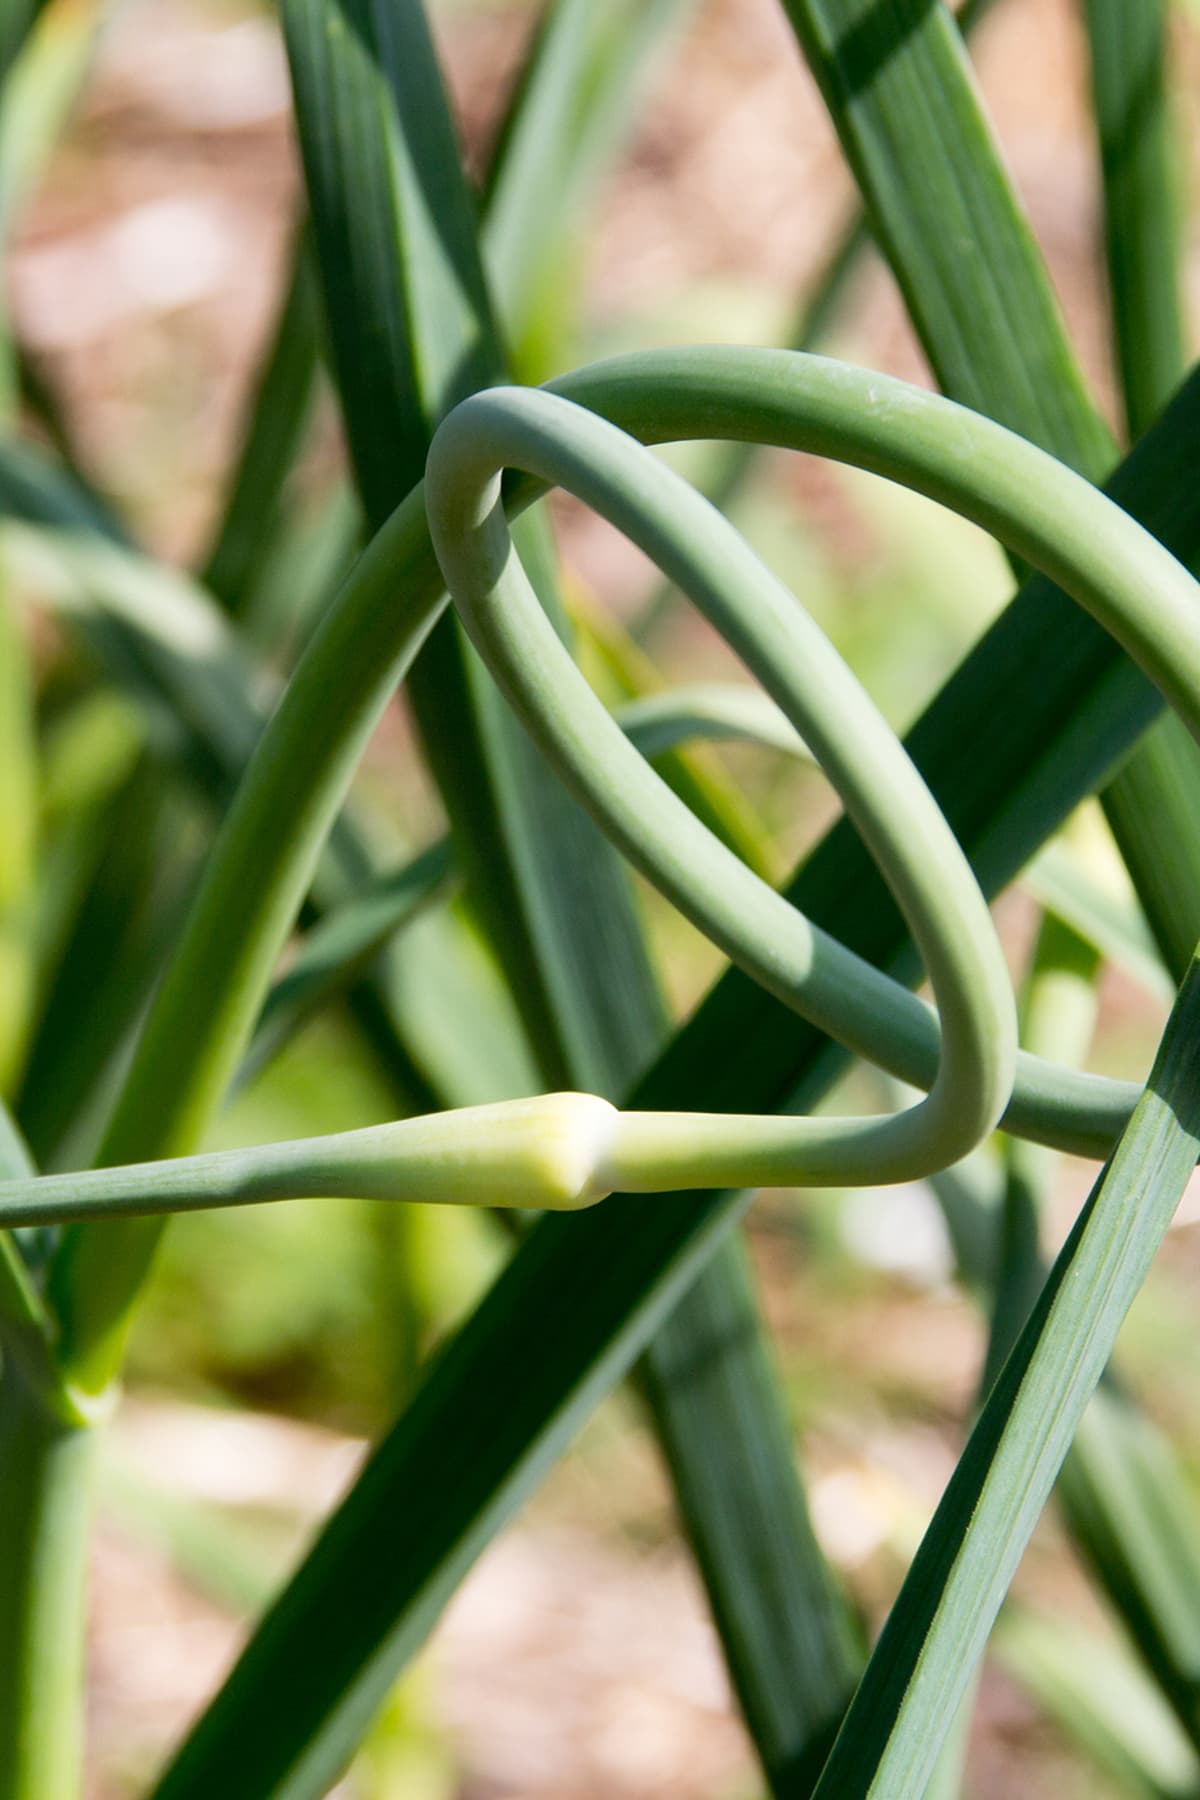 a garlic scape growing